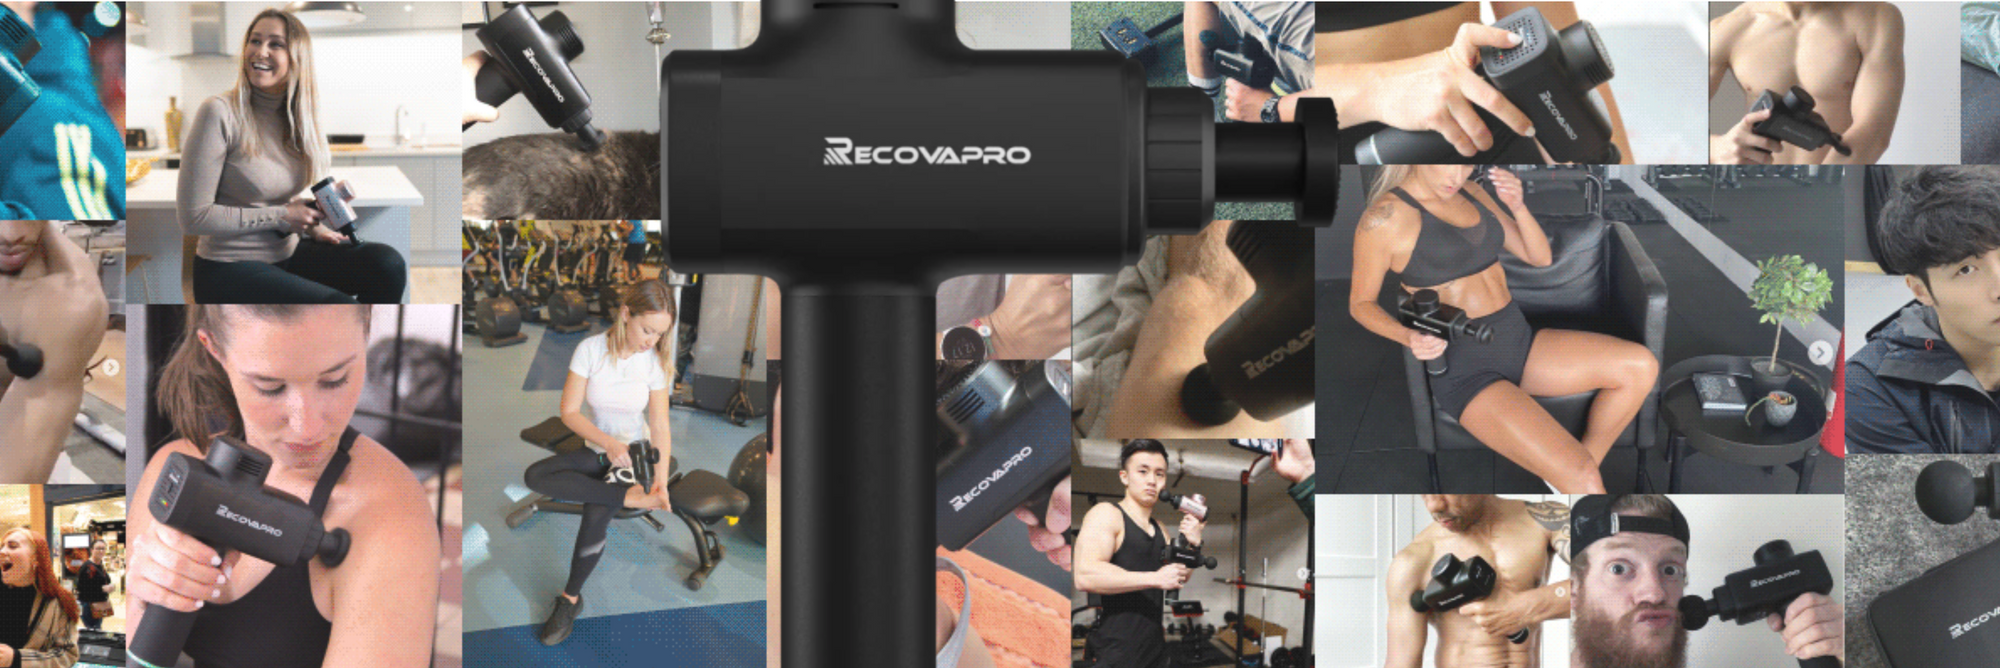 Why Recovapro is the best massage gun?